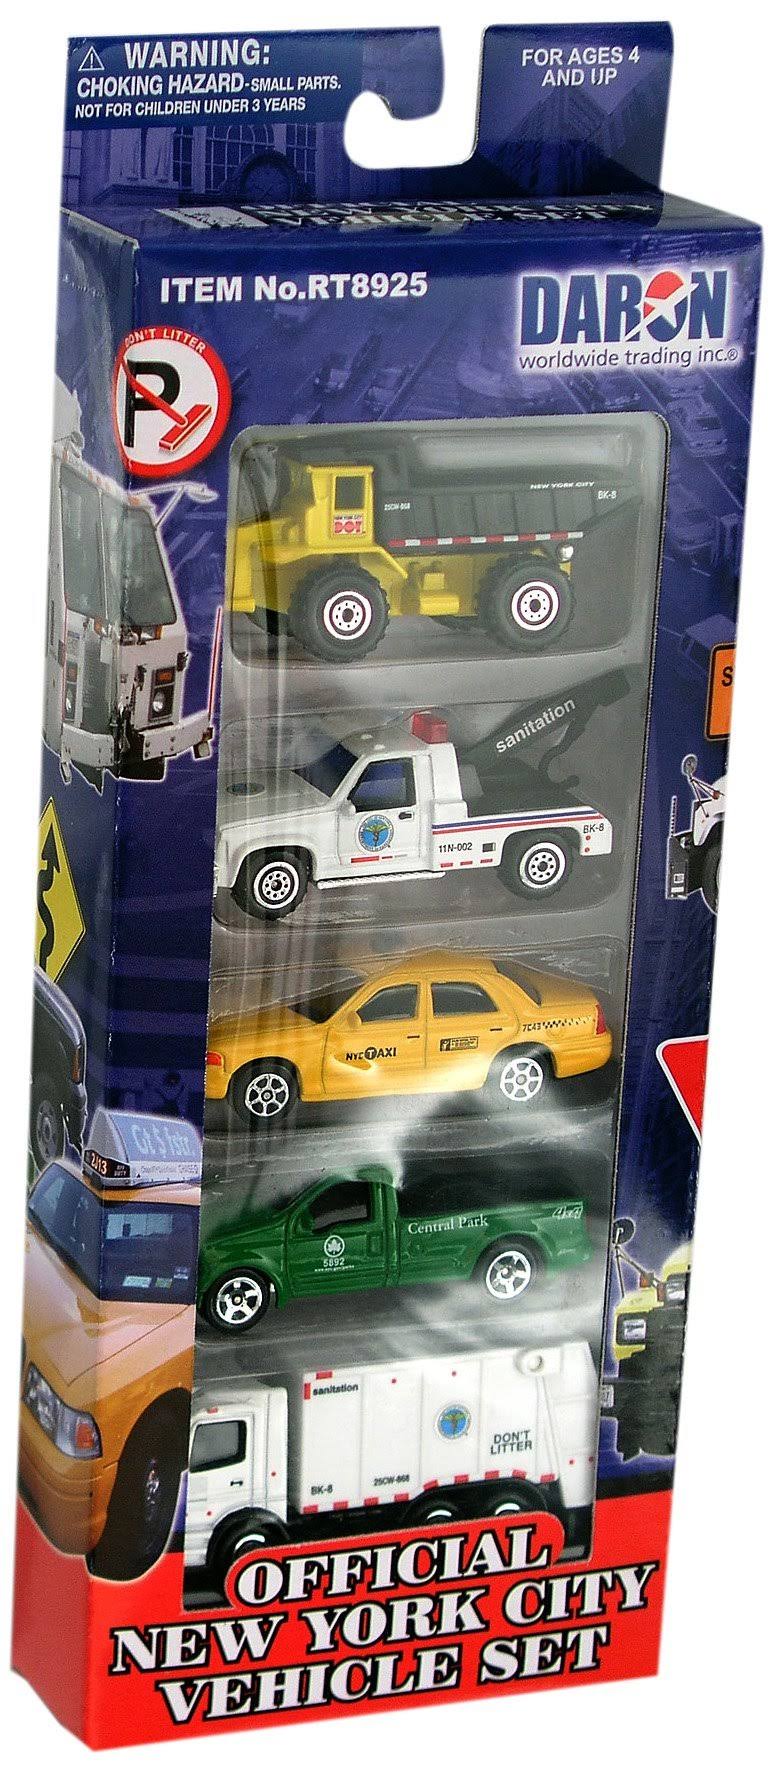 Daron Rt8925 New York City Official 5 PC Vehicle Set